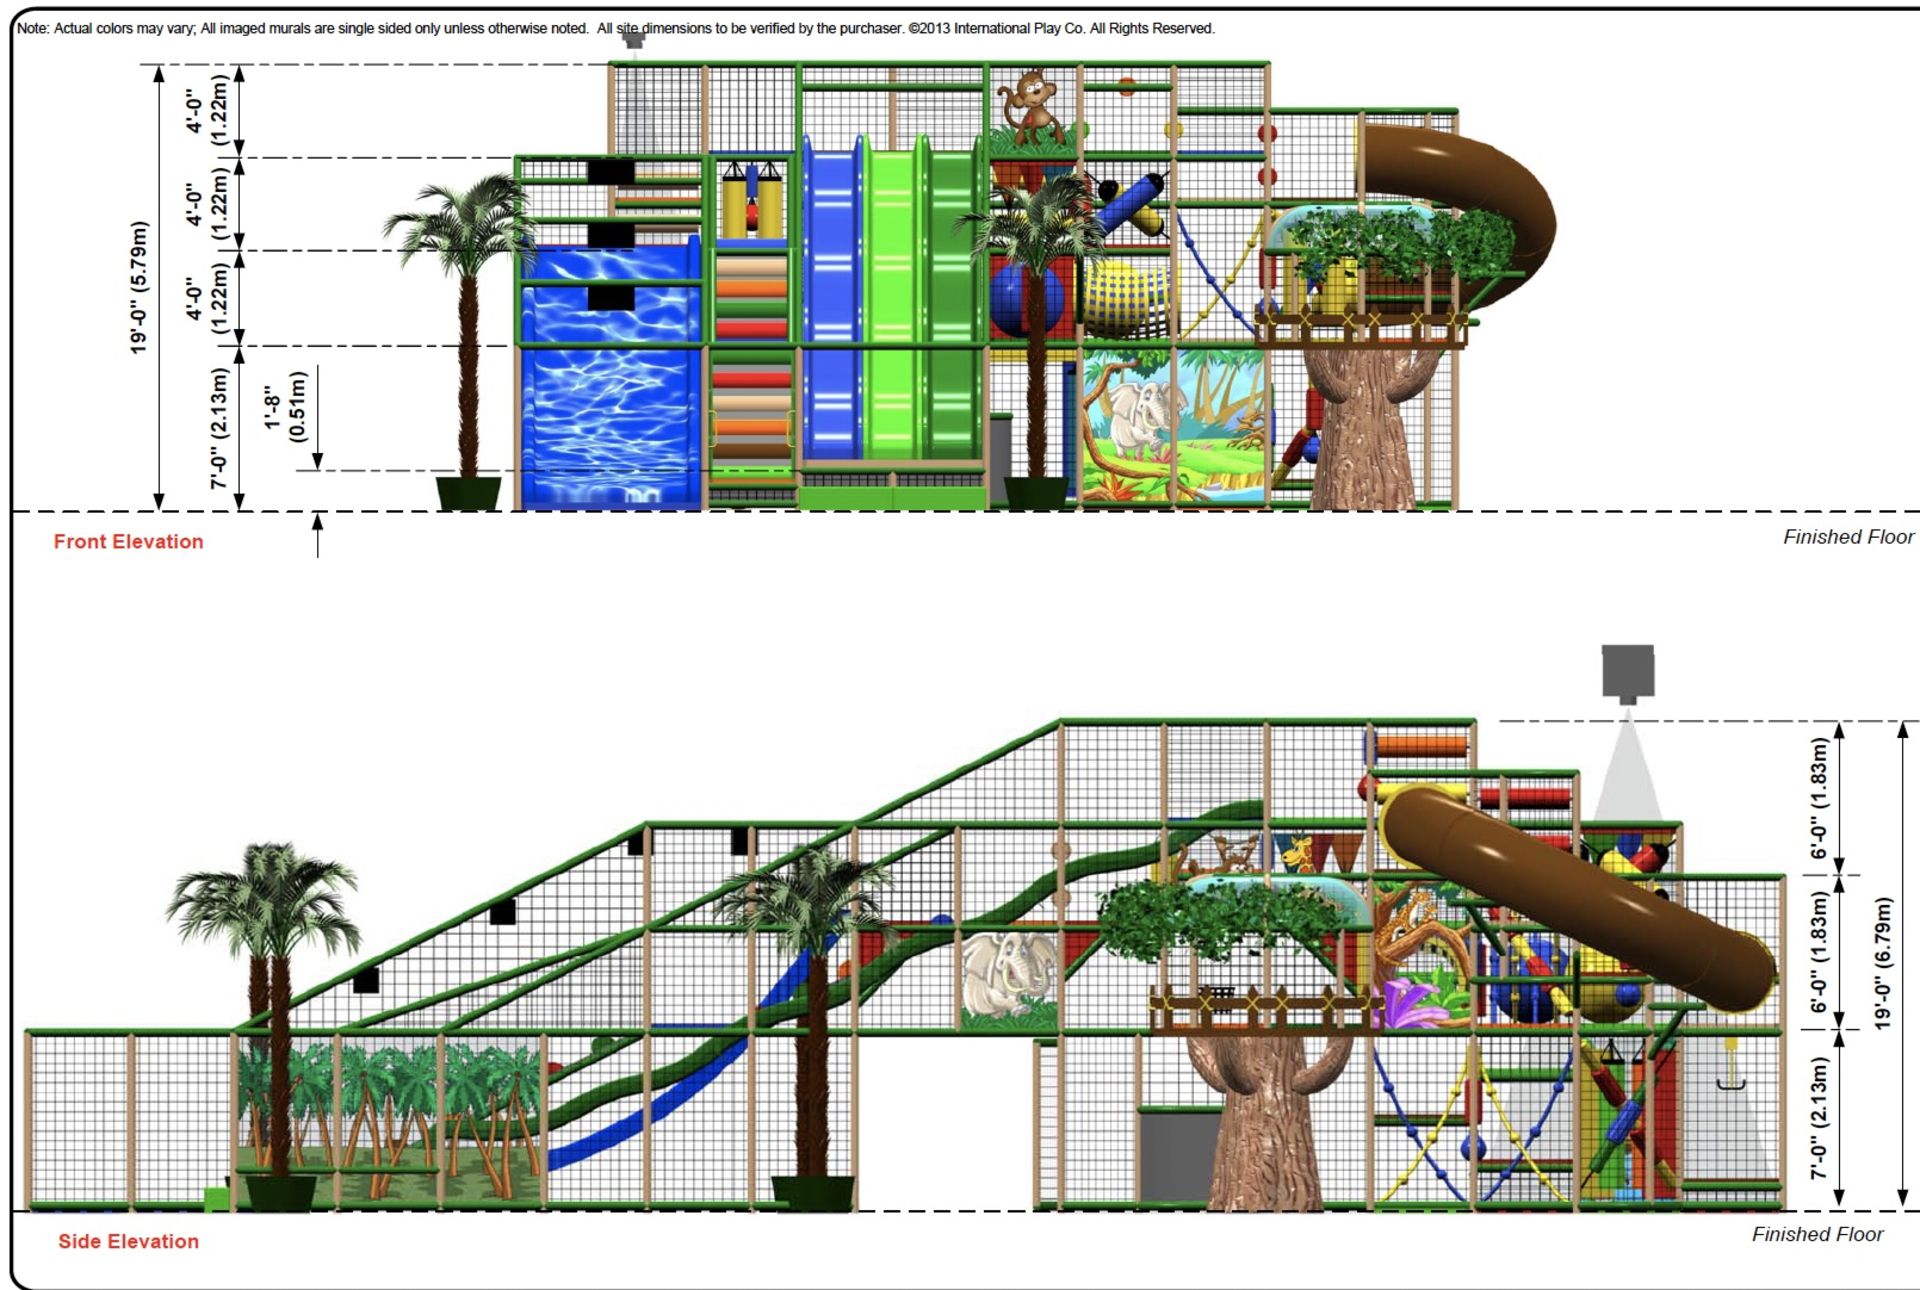 ONE INTERNATIONAL PLAY COMPANY LARGE INDOOR PLAYGROUND W/20FT HIGH SLIDES W/THREE WAVE SLIDE - Image 9 of 13